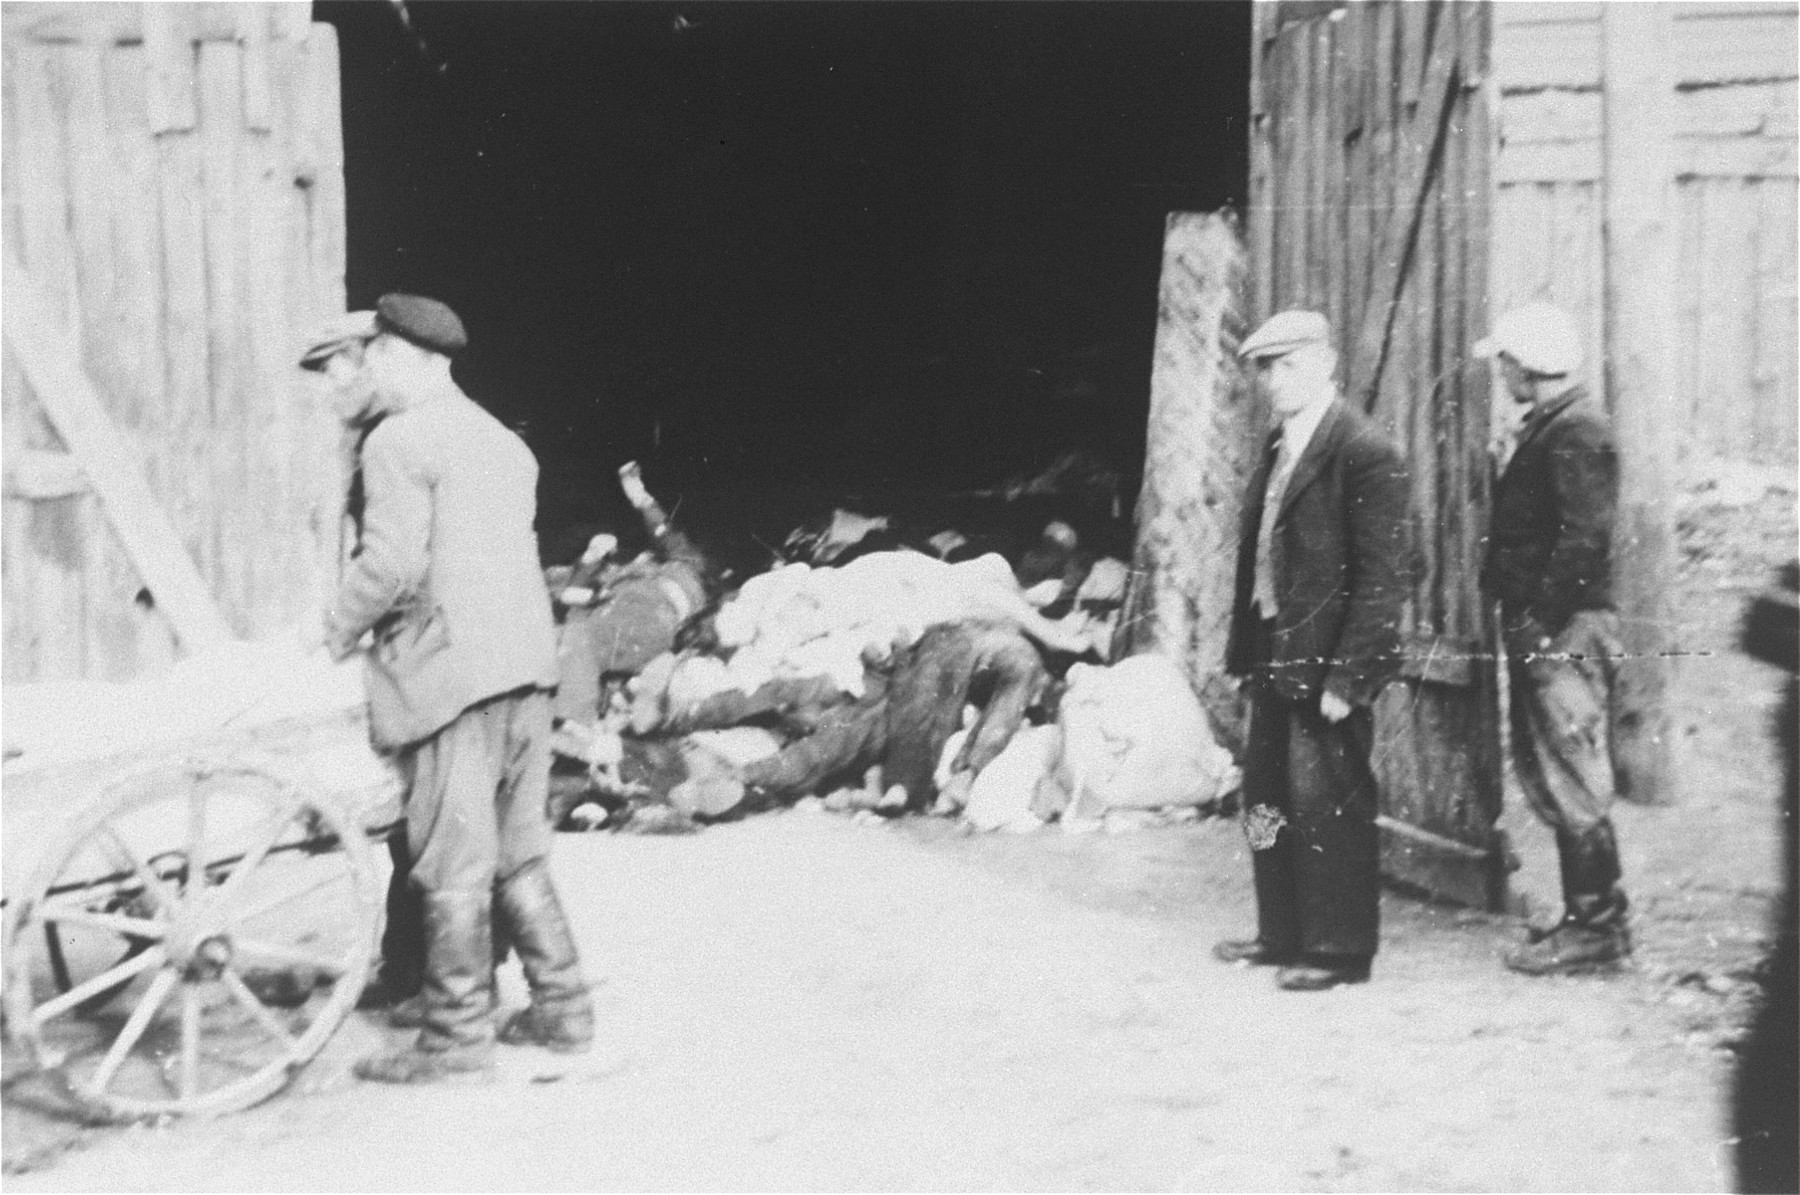 A Jewish council official named Kaminski (right, in front of the door) watches as men remove corpses from a cart and pile them in a barn in the Deblin Irena ghetto.